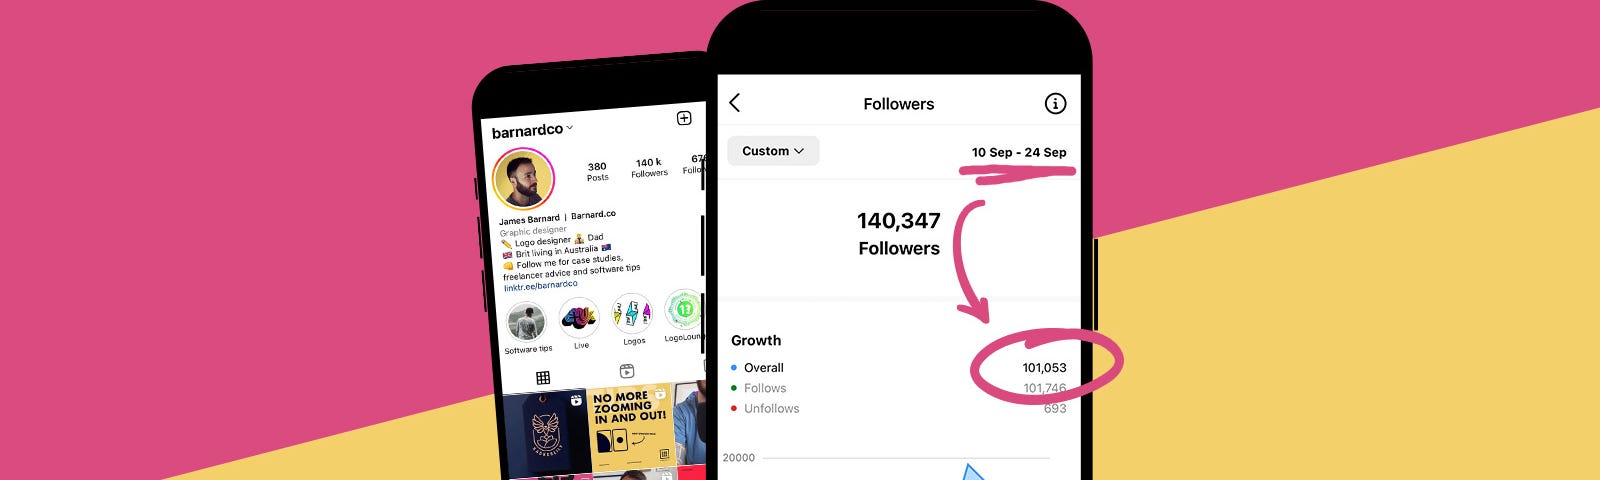 A screenshot from the analytics of the @barnardco Instagram account, showing the 100,000 new followers between a two week period.